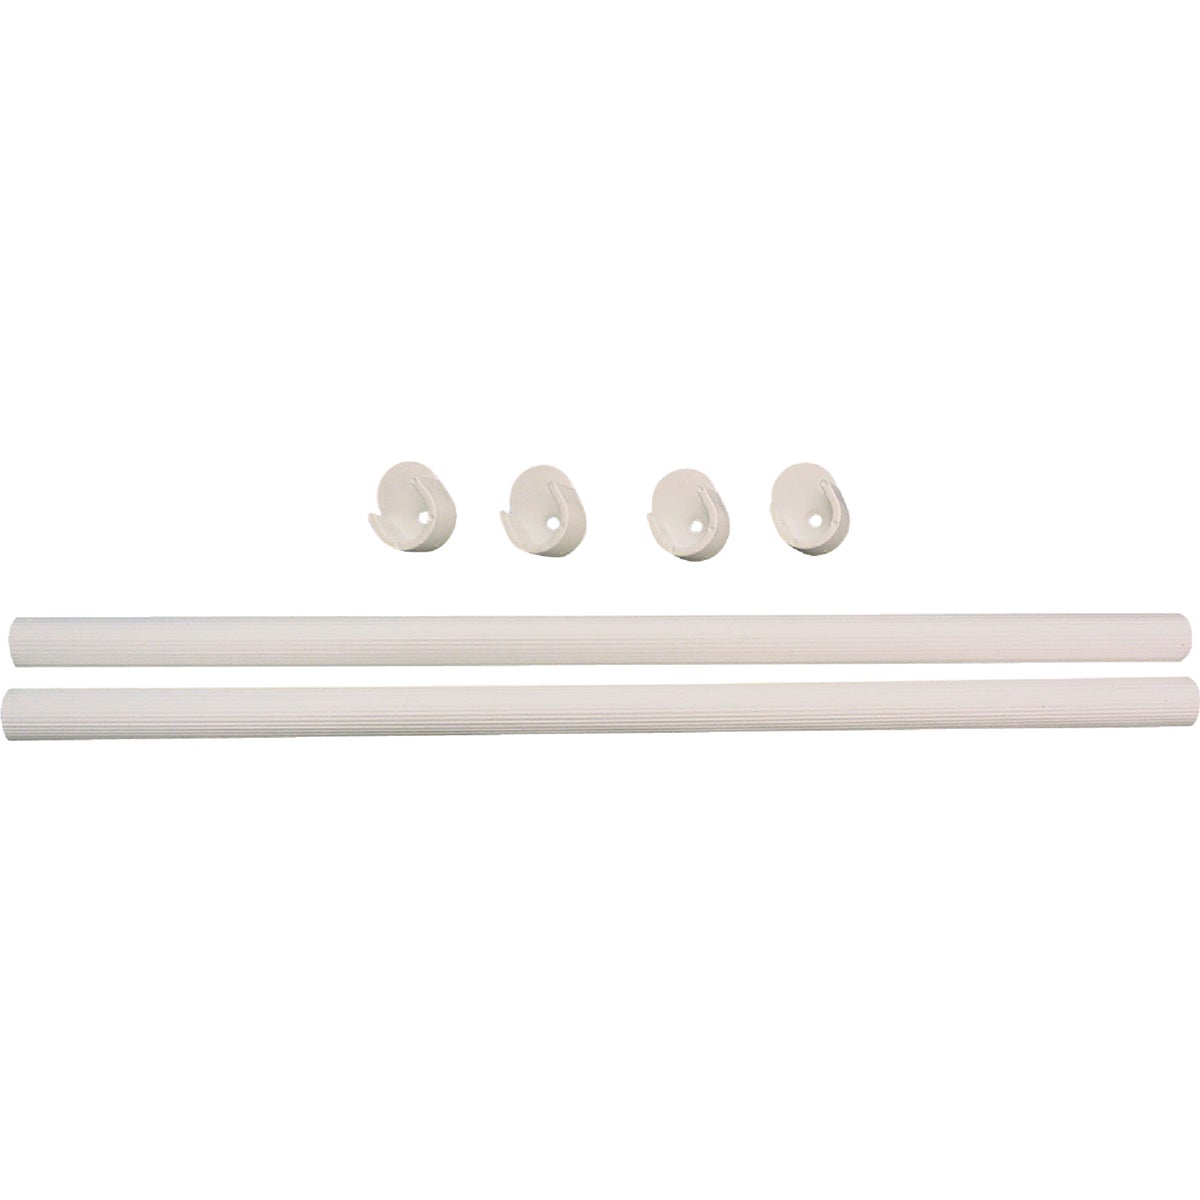 Easy Track 2 Ft. x 1 In. Closet Rod & Ends, White